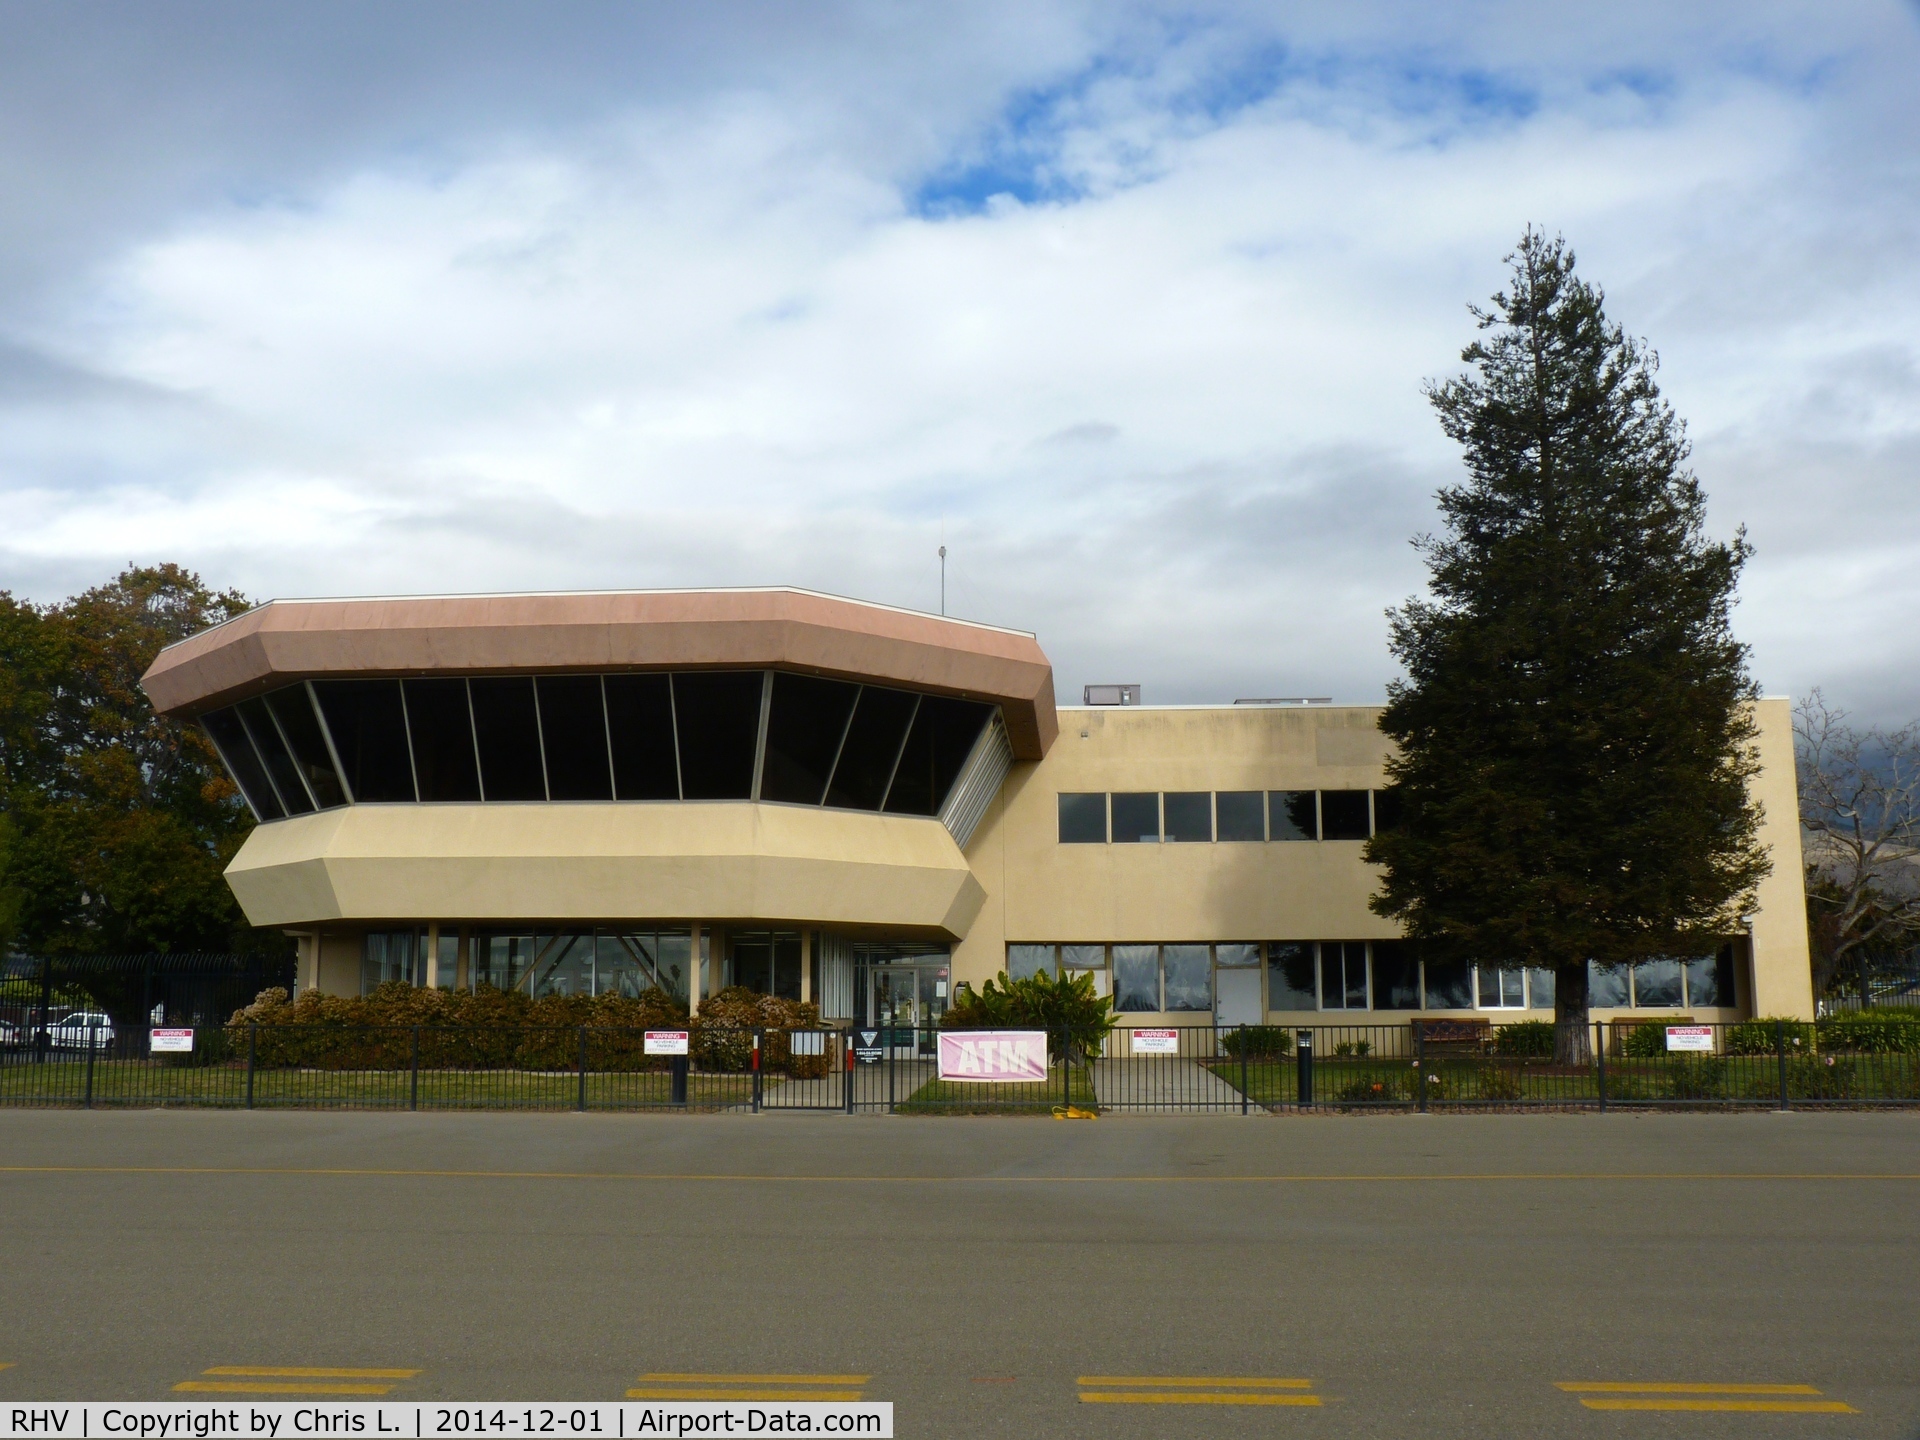 Reid-hillview Of Santa Clara County Airport (RHV) - Nice air conditioned Reid-Hillview Airport terminal.